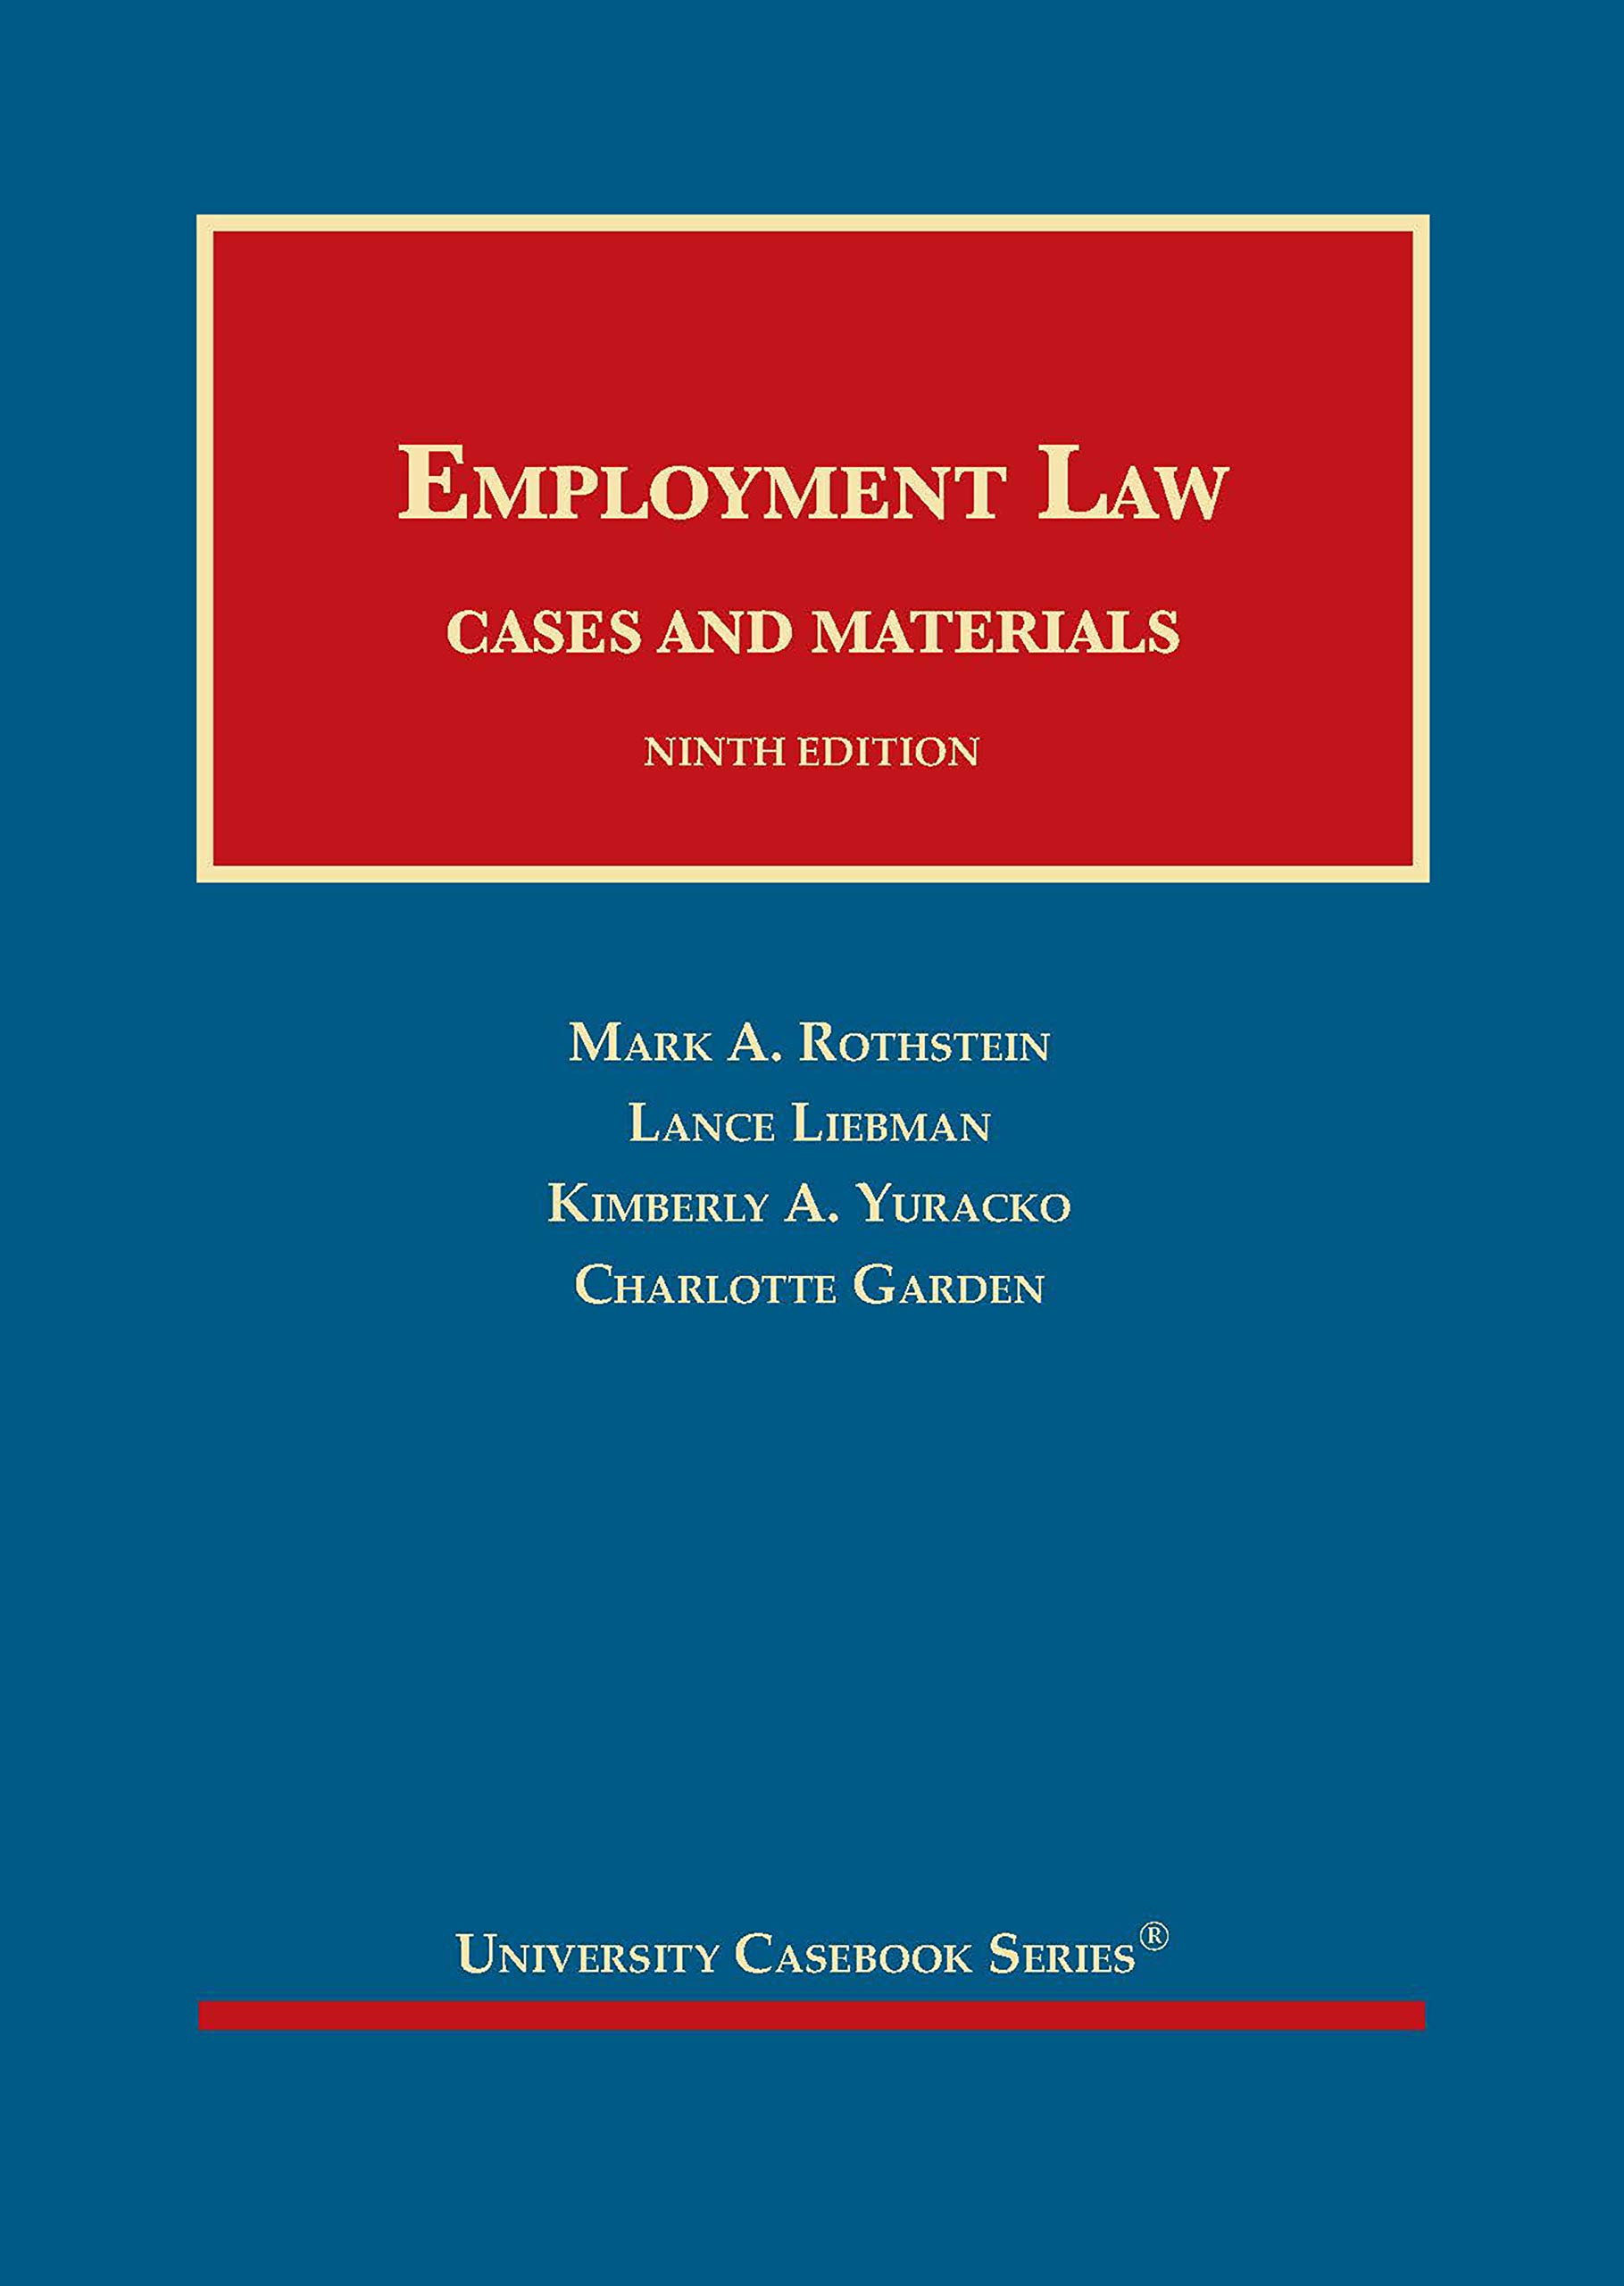 Employment Law, Cases and Materials (University Casebook Series)